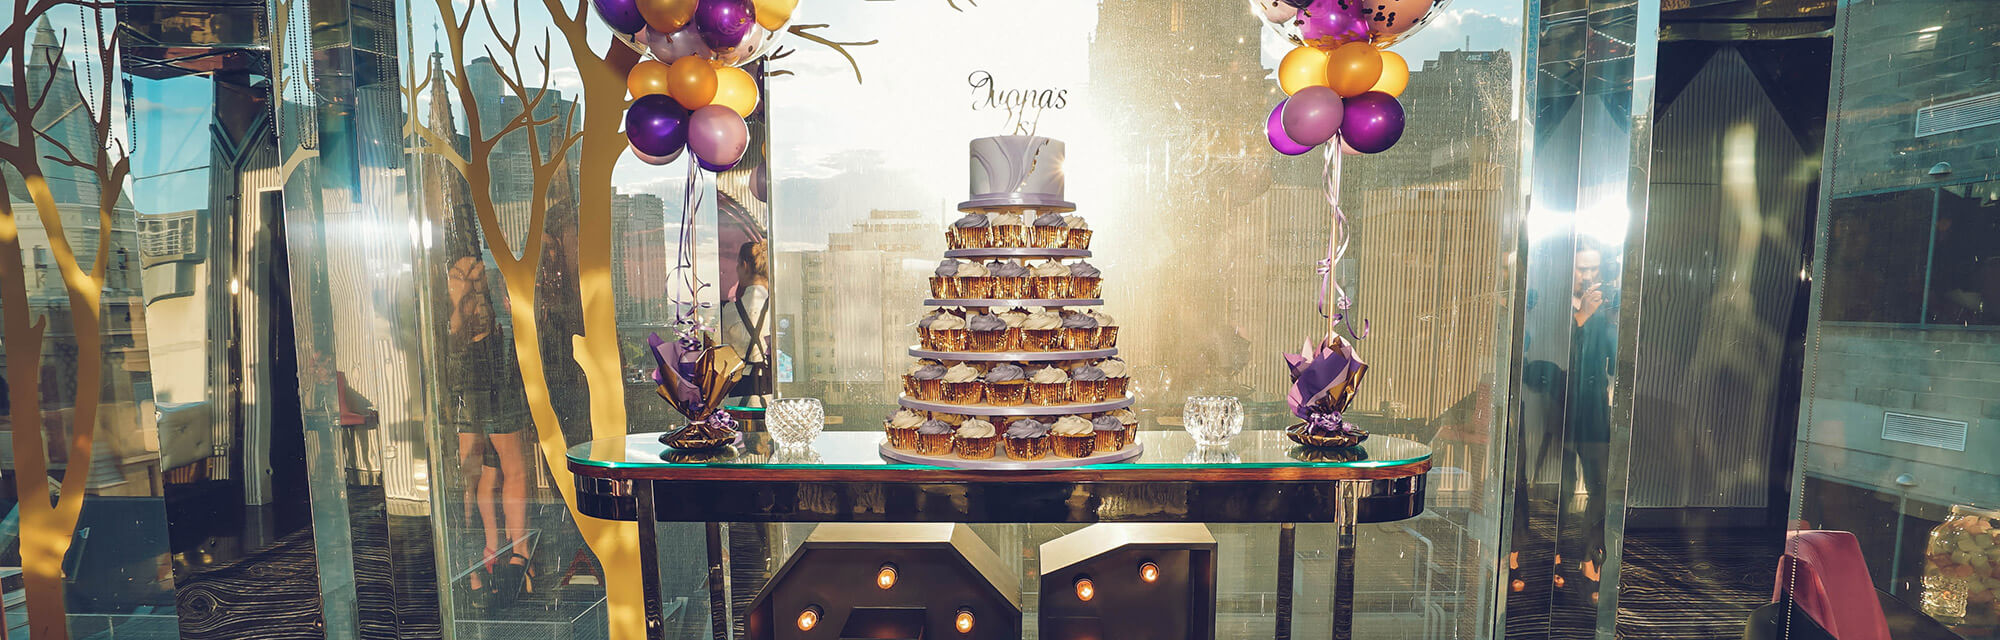 21st-birthday-party-venues-for-hire-in-melbourne-melbournes-best